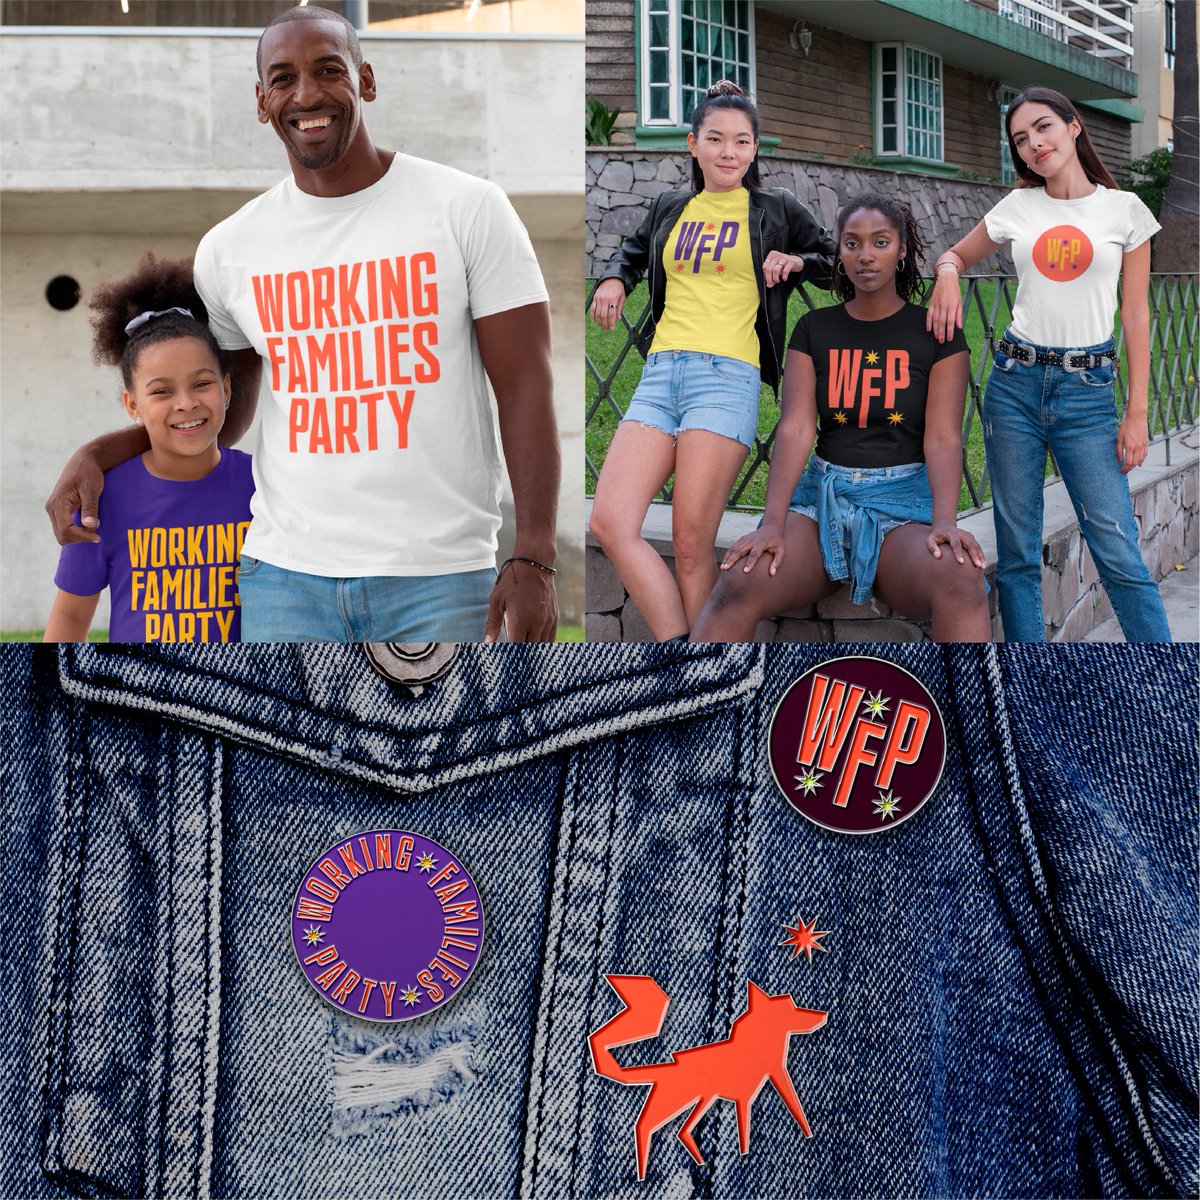 If you dig the new brand (and most importantly, the work we’re doing to build a multiracial movement working to make this a country for the many, not the few) check out our new website and take action now (and maybe buy a shirt while you're there):  http://WorkingFamilies.org 